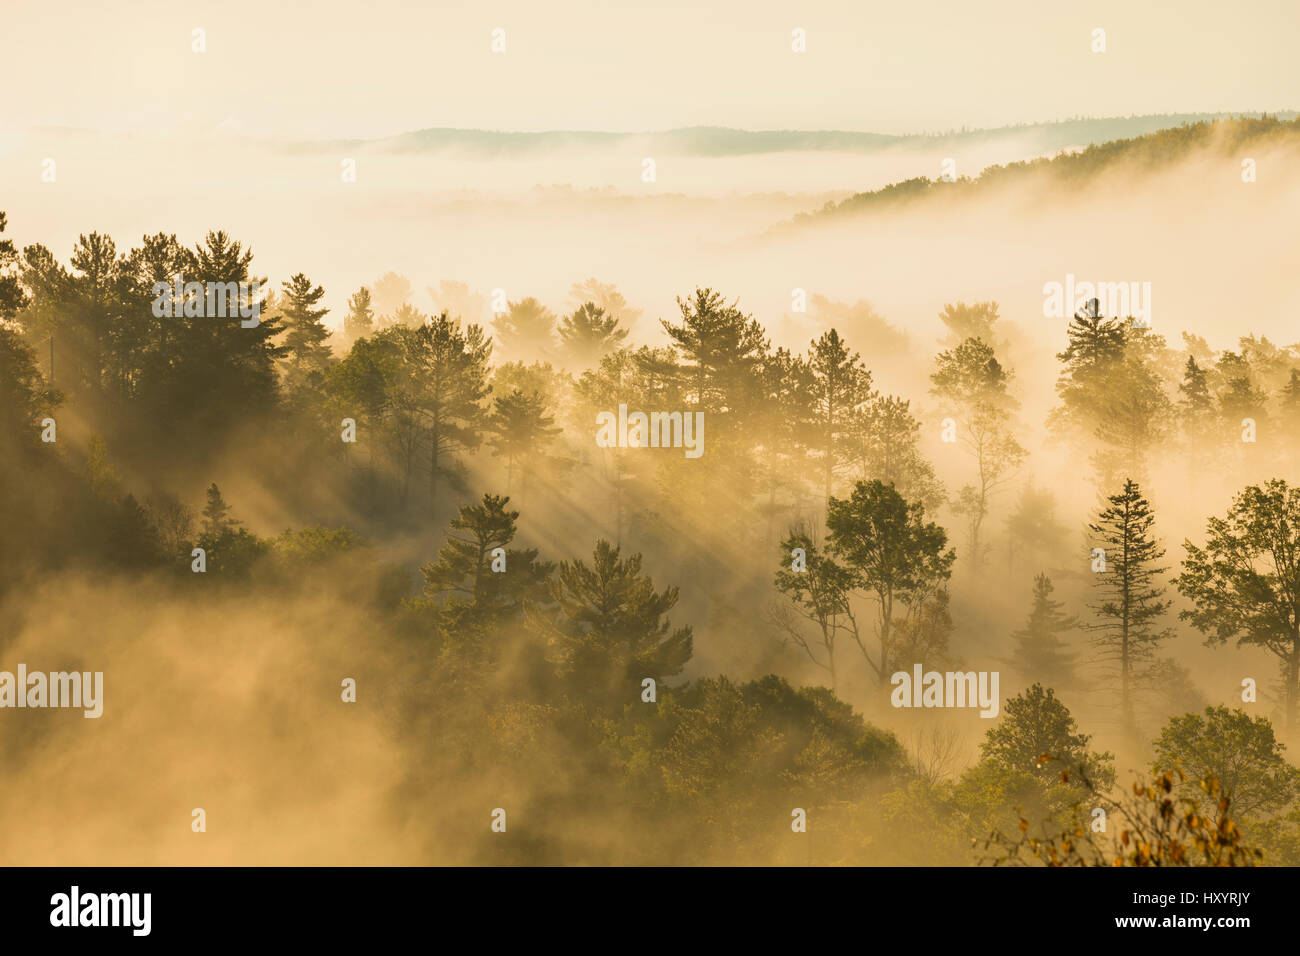 Hillside with pines and aspens in early morning mist and light Stock Photo